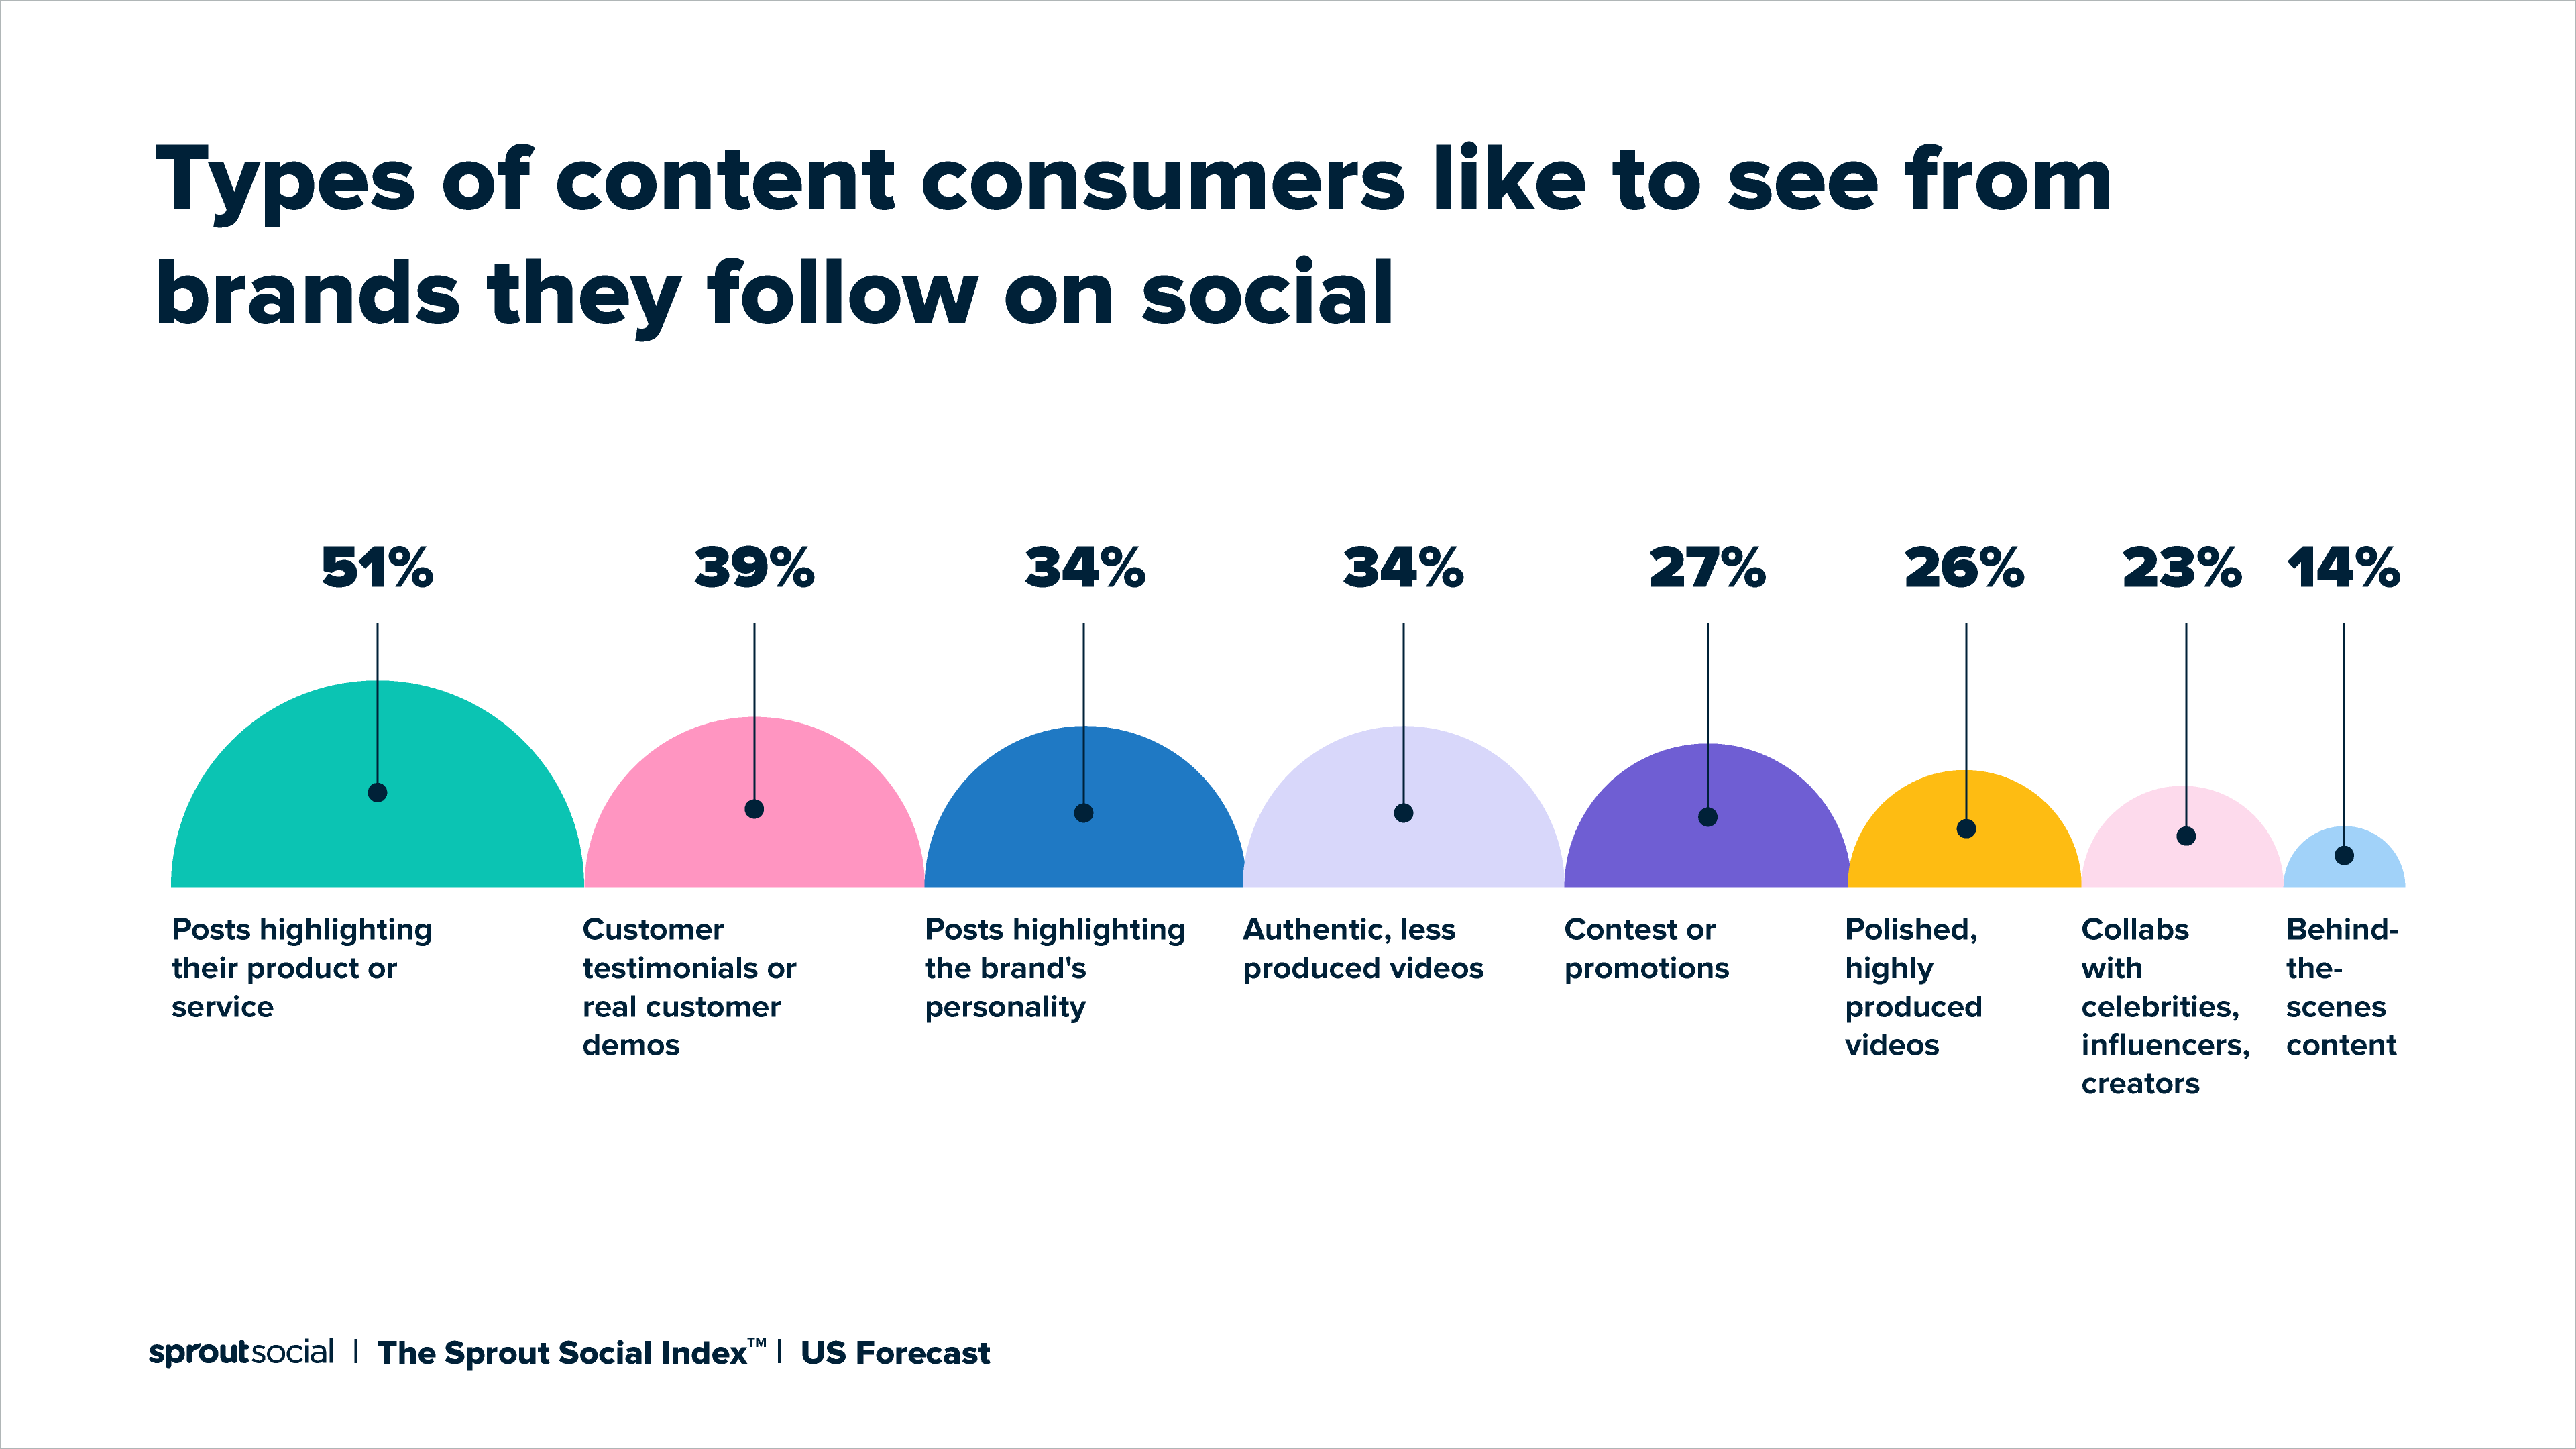 Graphic showing the types of content consumers like to see from brands they follow on social. Posts highlighting their product or service (51%) and customer testimonials or real customer demos (39%) are the types of content they like to see the most.